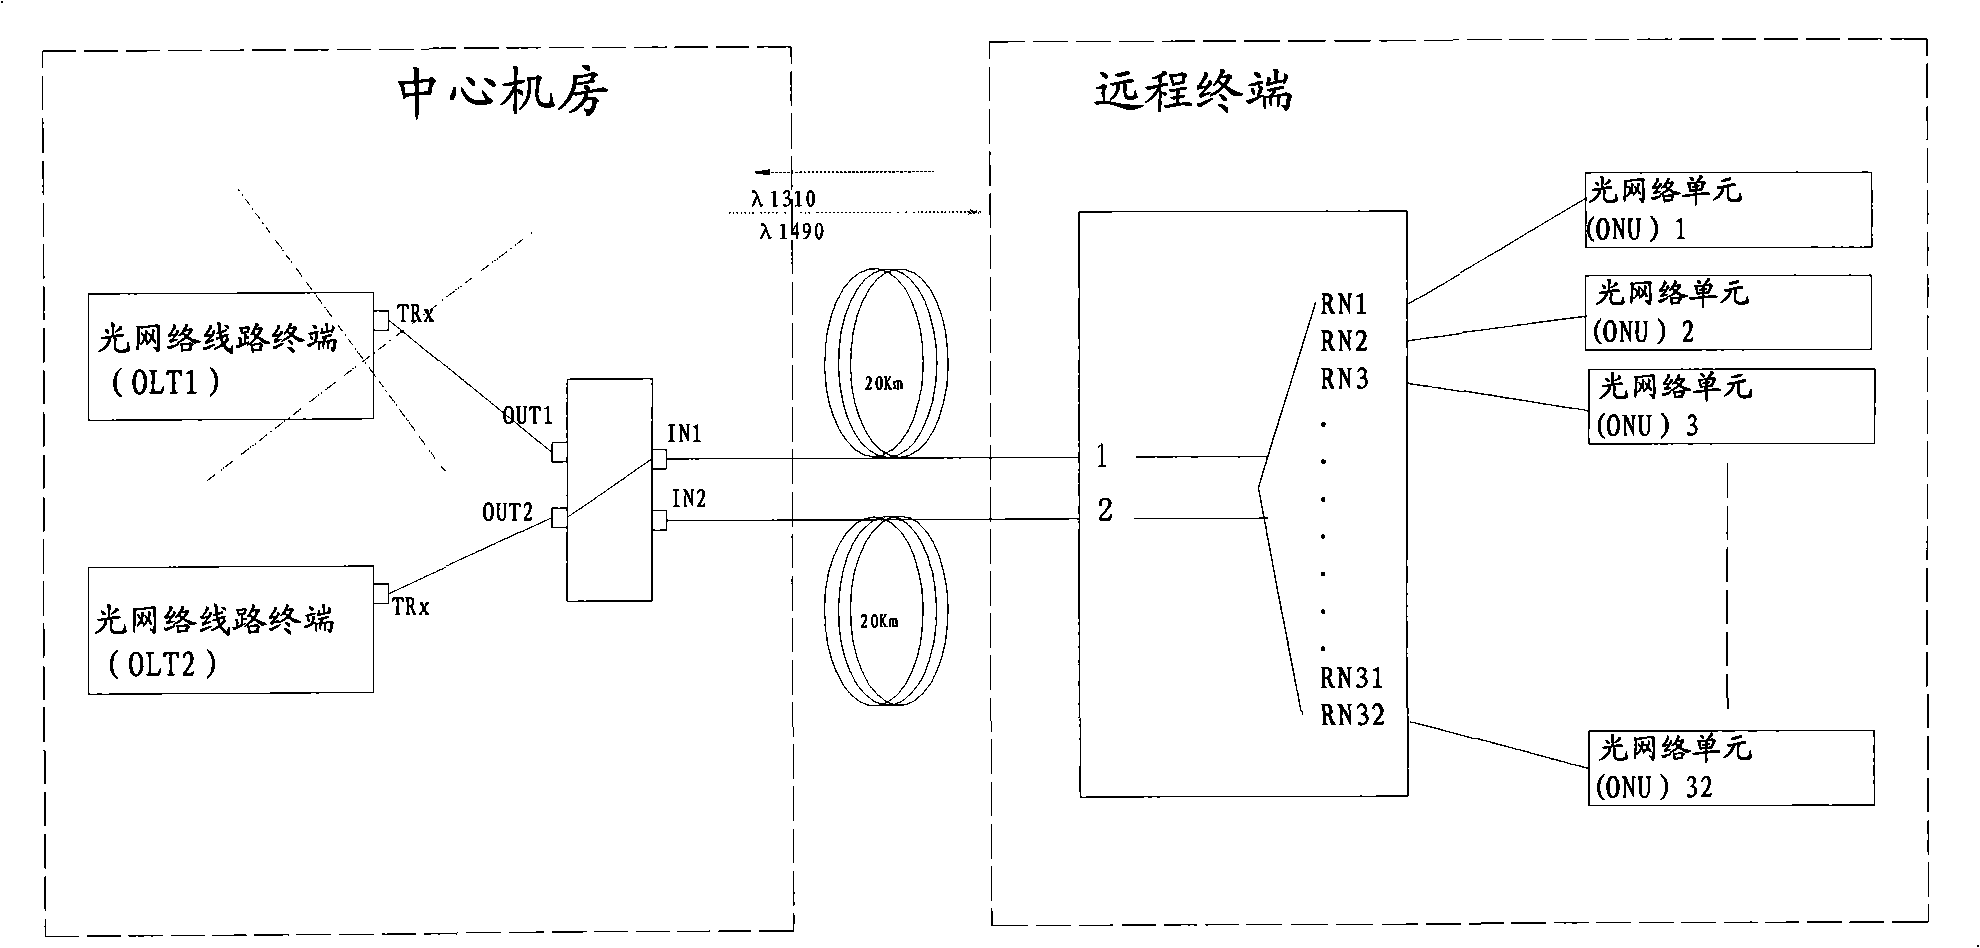 Protection system for light passive network